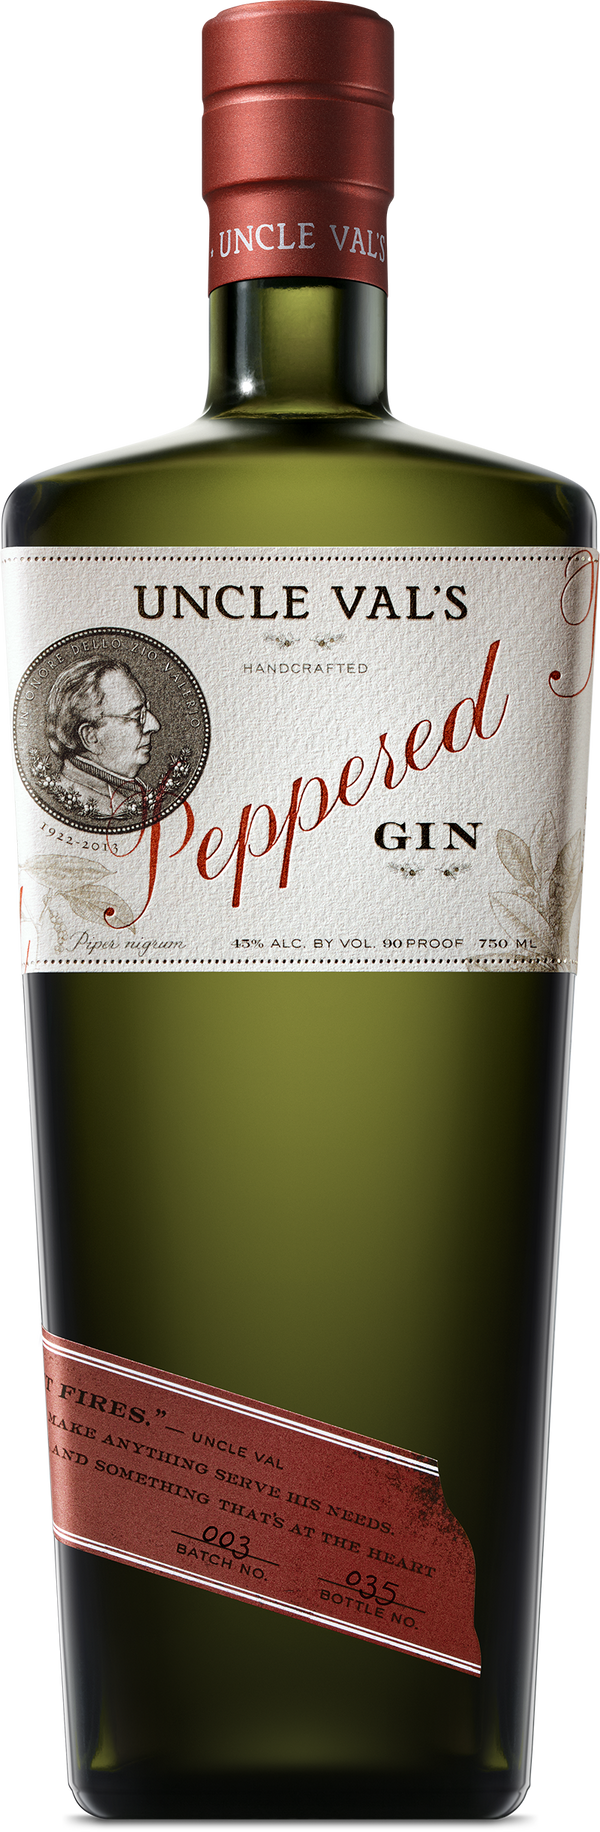 Peppered Gin 0,7l 45% Vol. Uncle Val's